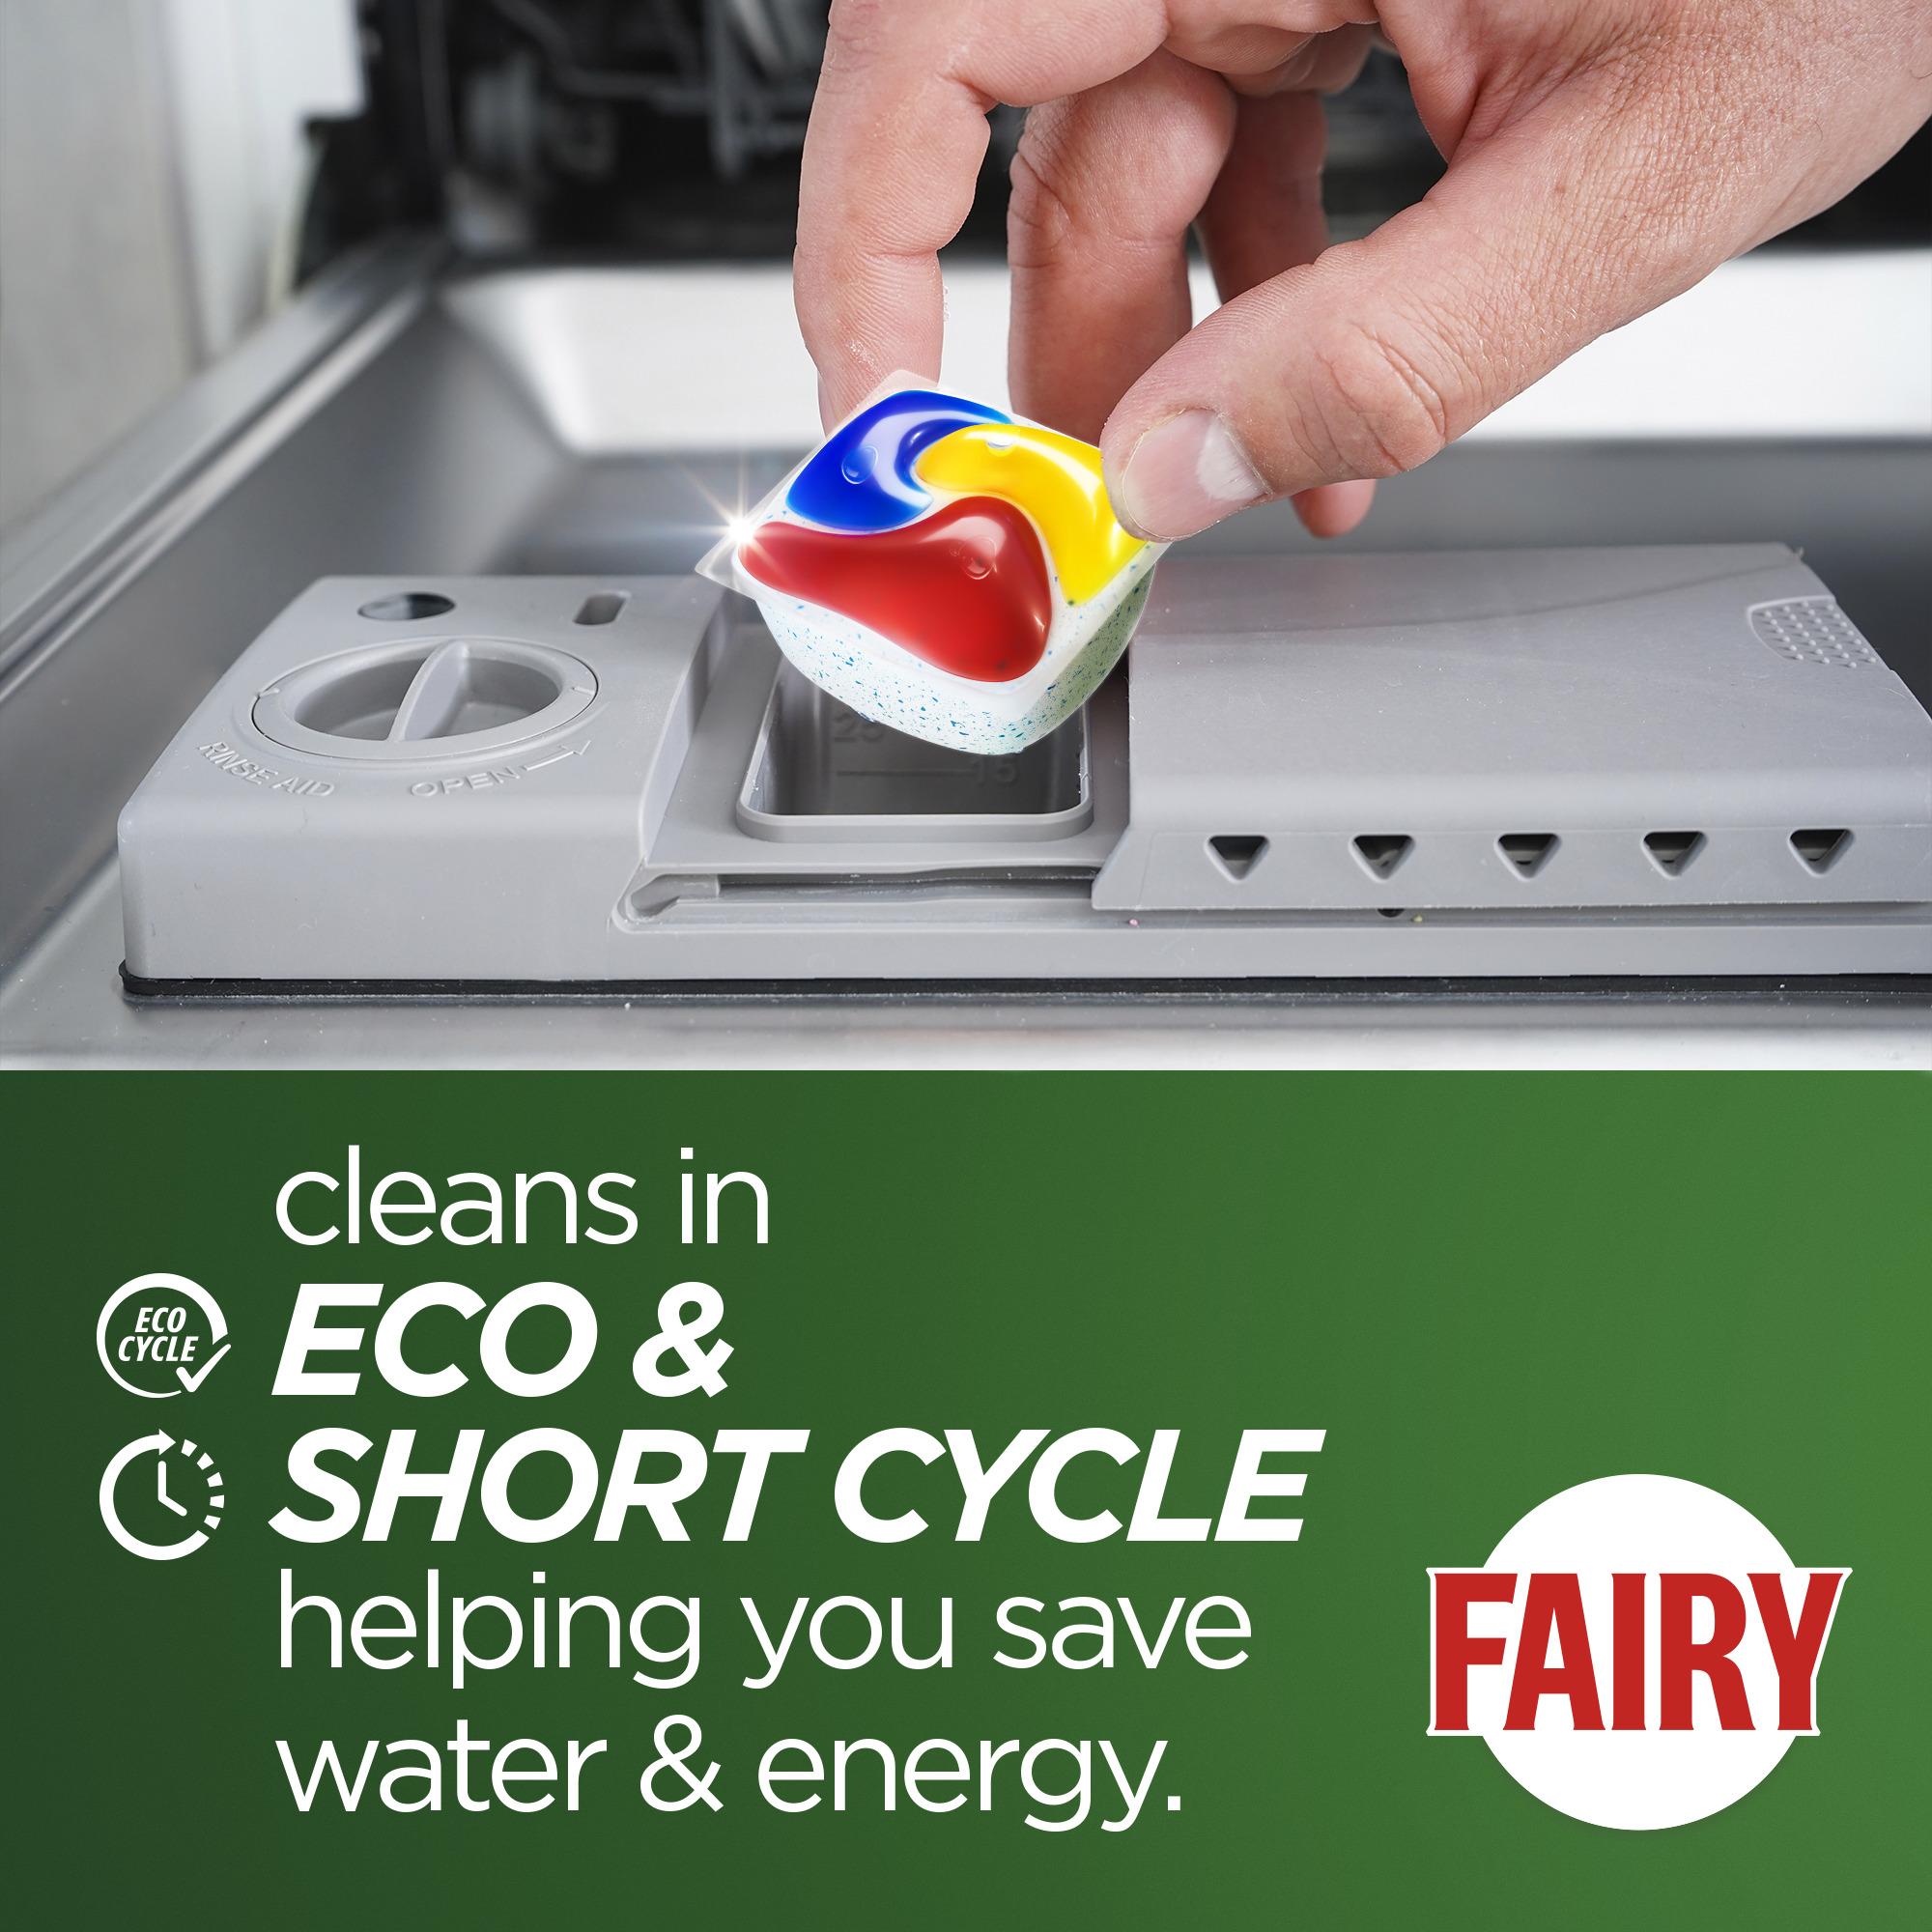 Fairy Platinum Plus Dishwasher Tablet's product packaging is made with recyclable terracycle & the plant operates with 100% renewable energy